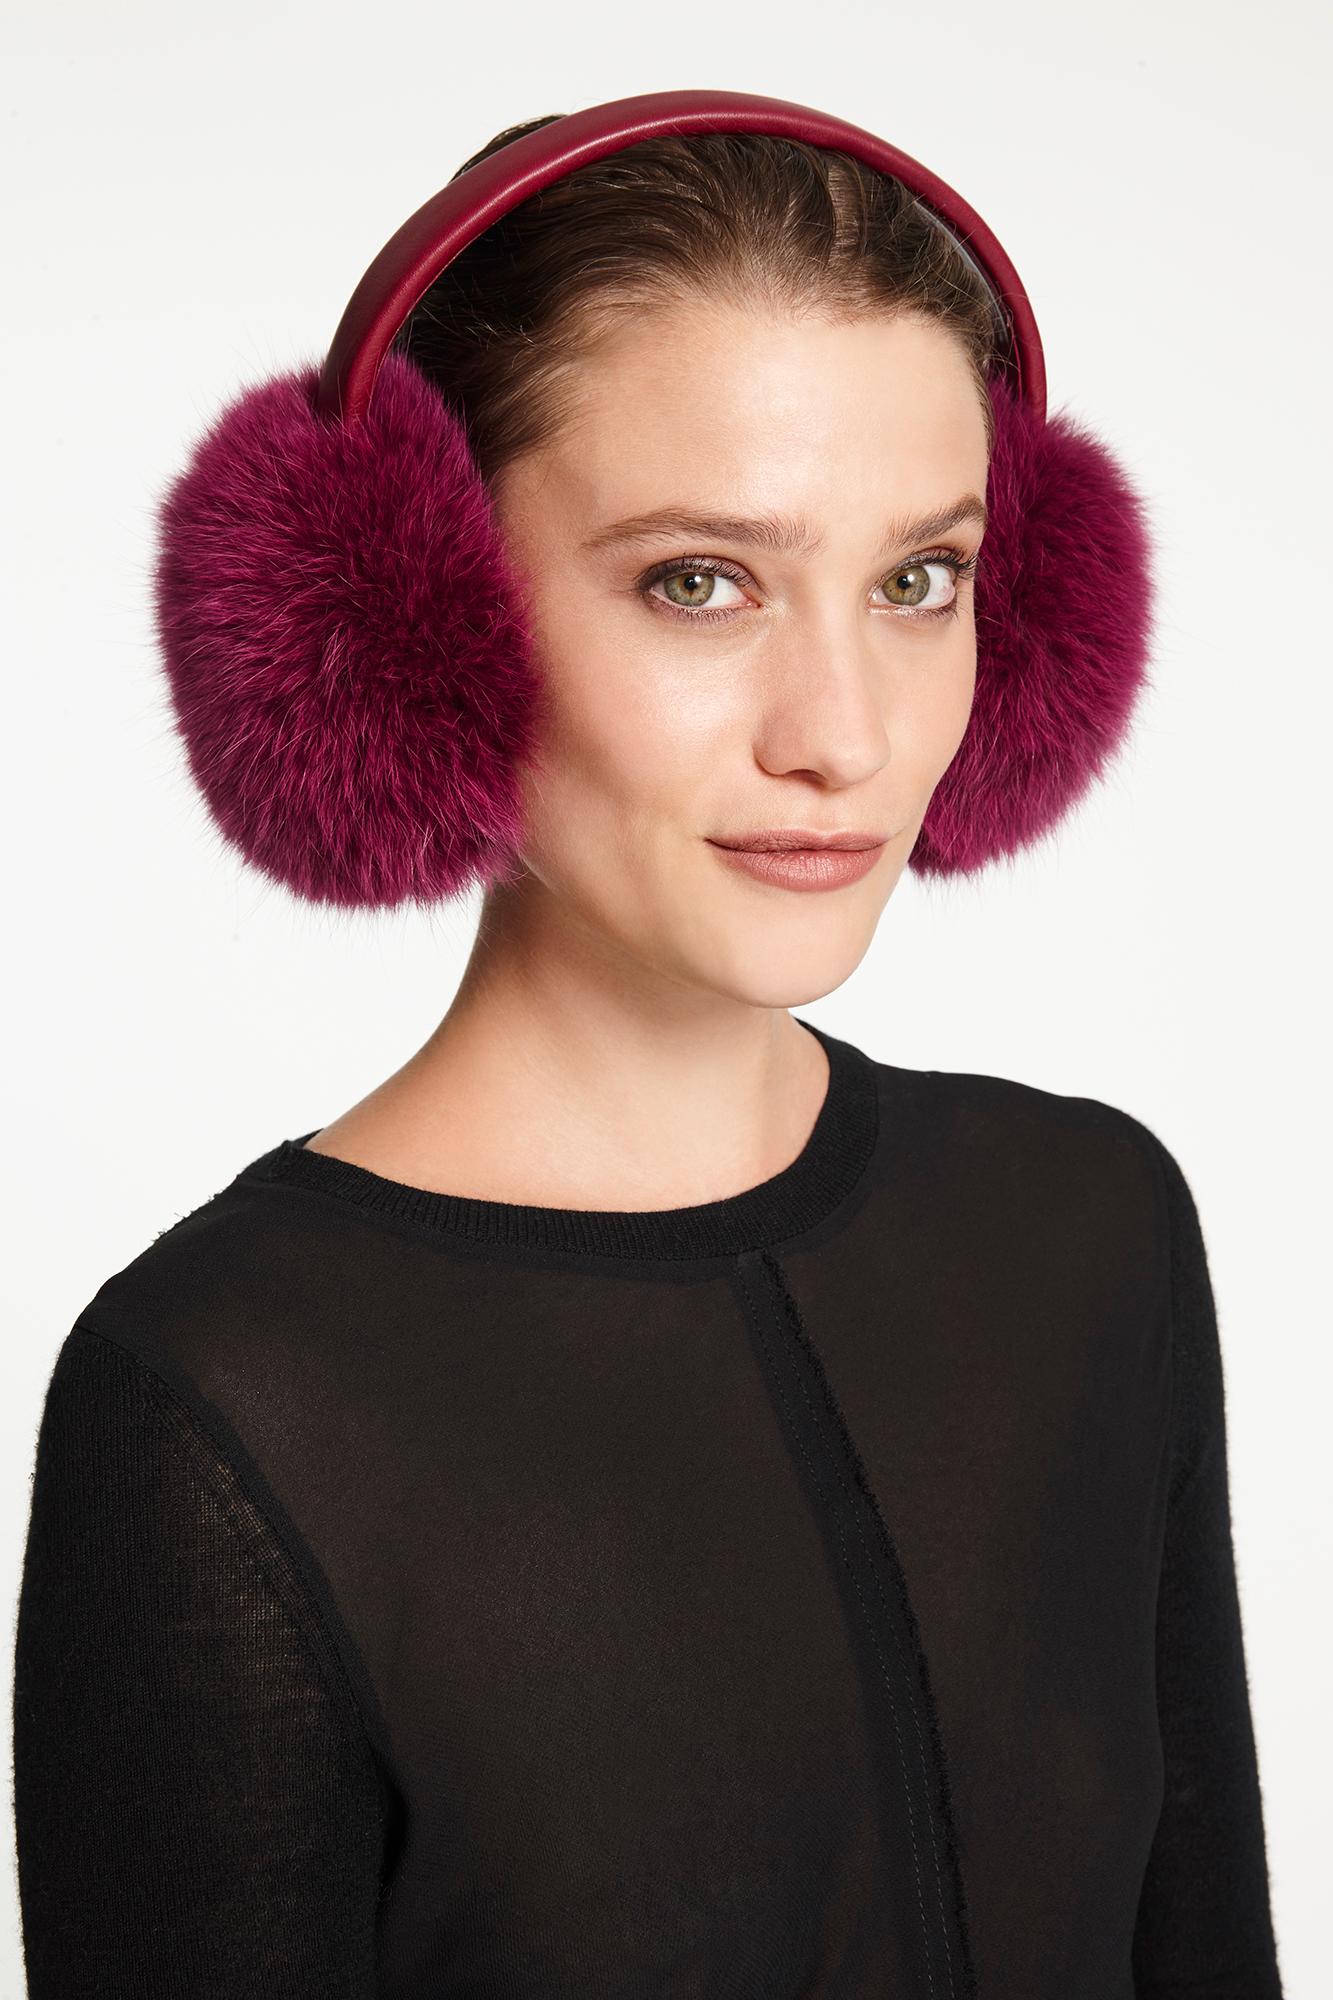 The perfect Christmas gift - Verheyen London Fox ear muffs are the perfect accessory for winter/autumn dressing. Stay cosy all winter in these luxurious and sumptuous ear muffs wherever you go.

All fur is origin assured and ethically sourced from